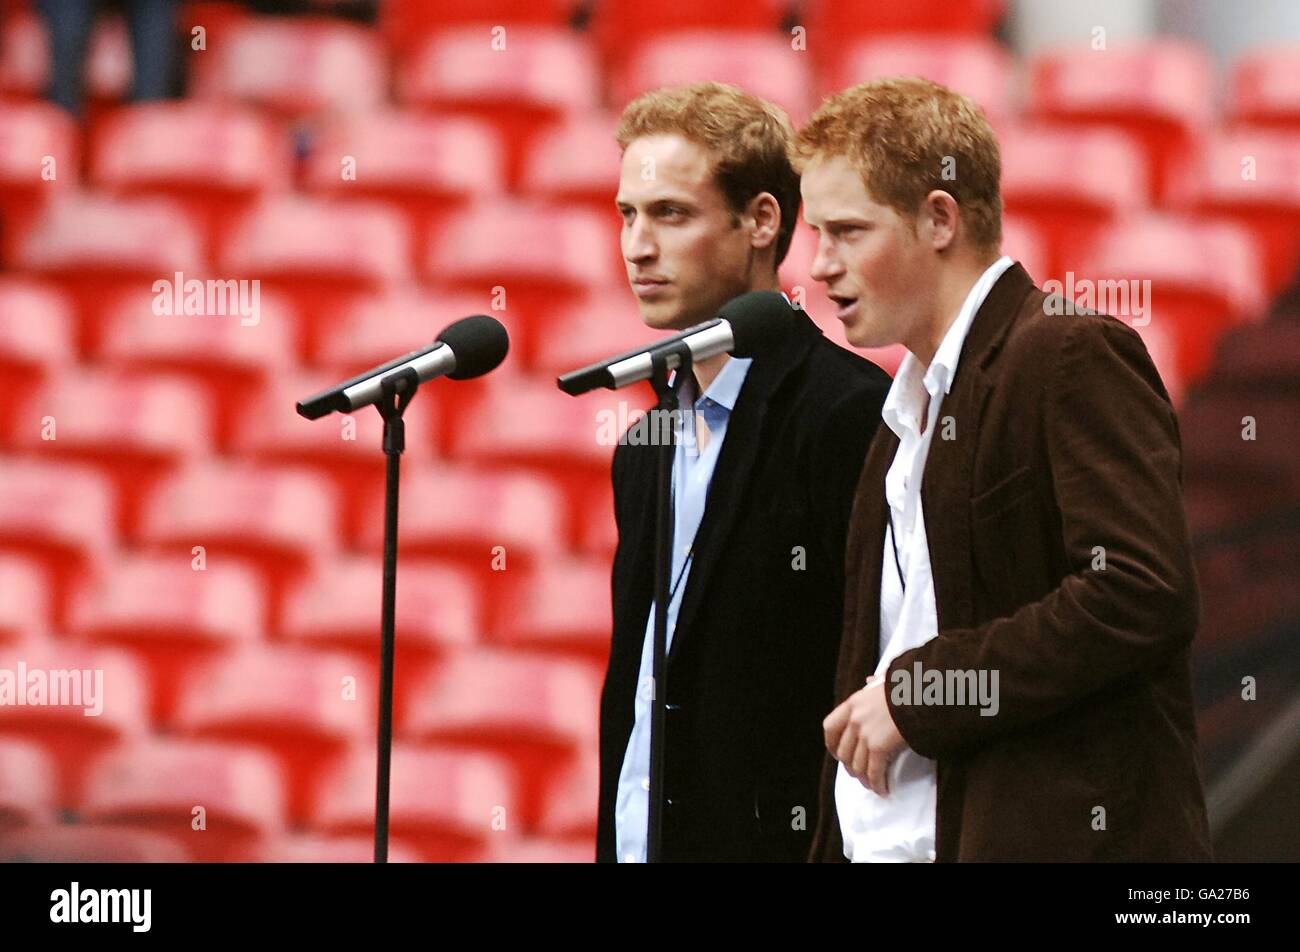 Princes William and Harry address the crowd during the charity concert in memory of their mother Diana, Princess of Wales on what would have been her 46th birthday at Wembley Stadium, London. Stock Photo